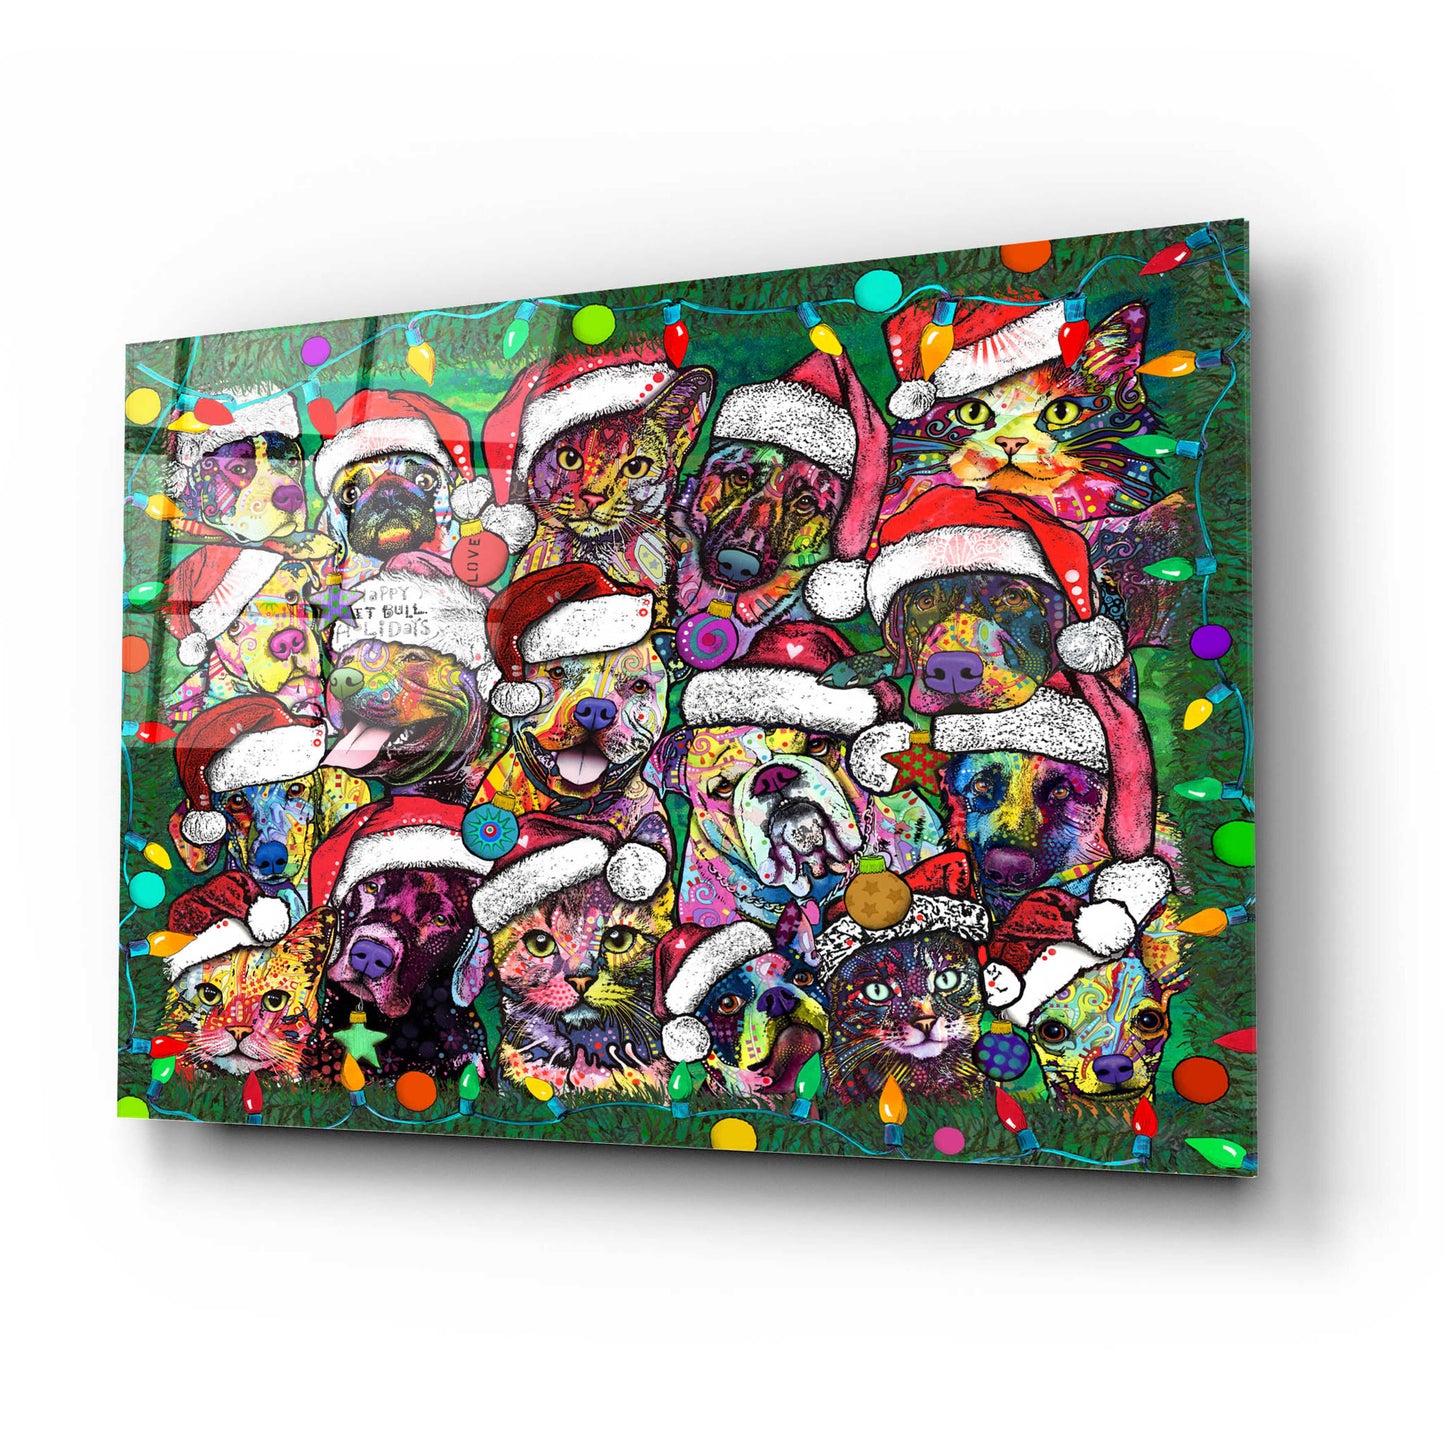 Epic Art 'Christmas Collage' by Dean Russo, Acrylic Glass Wall Art,24x16